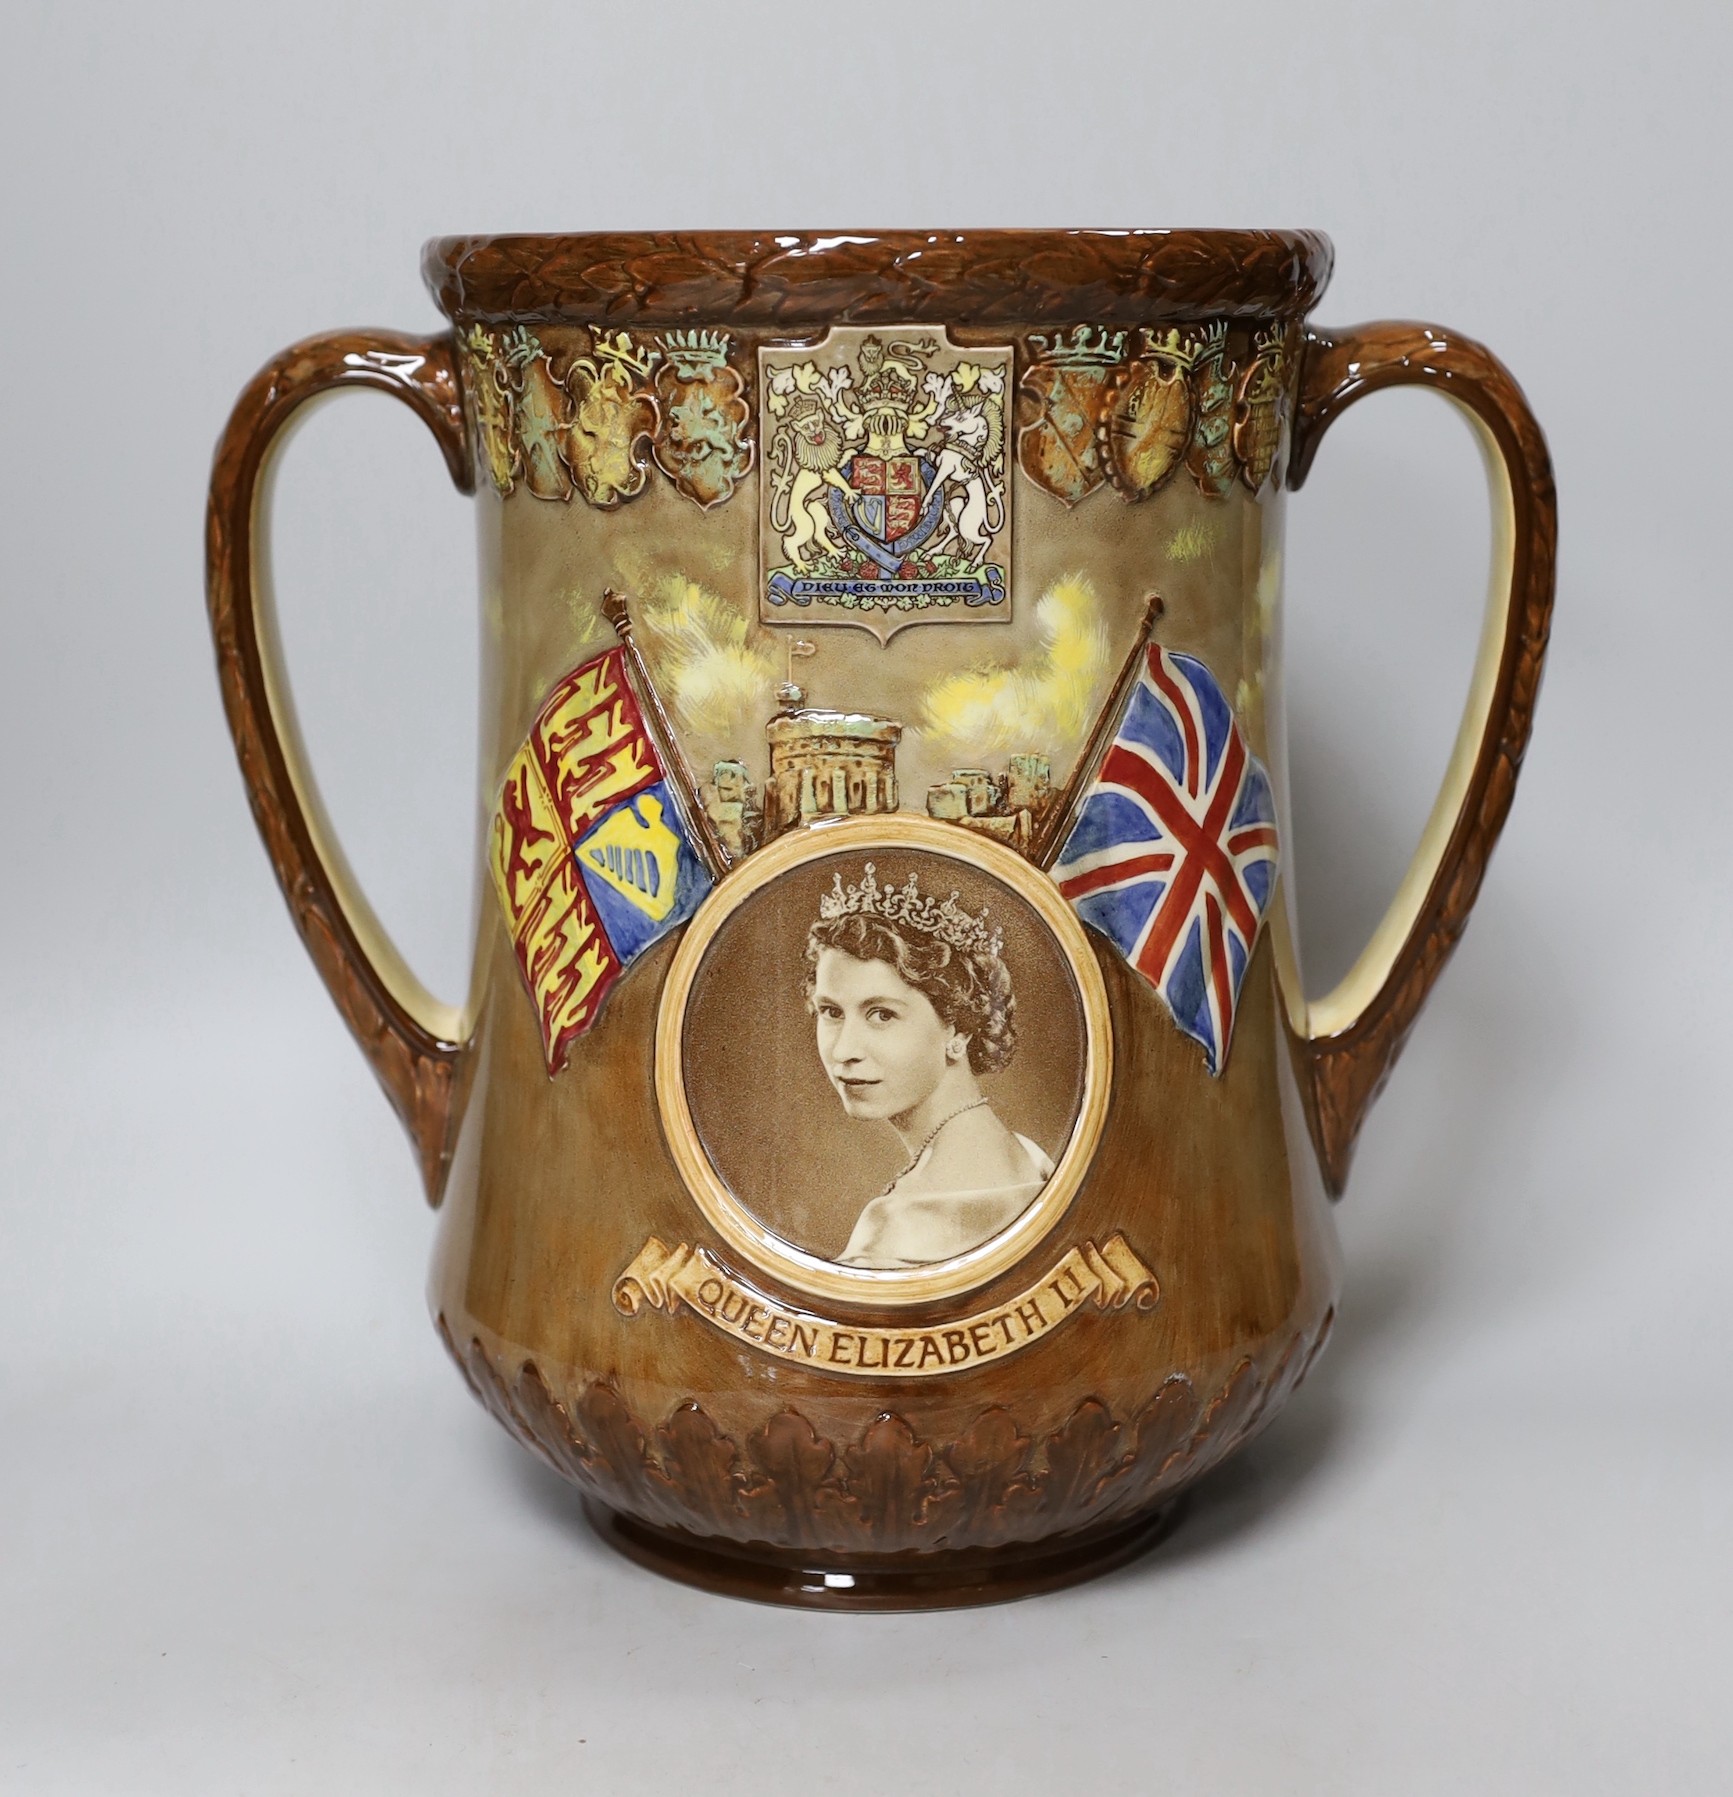 A Royal Doulton loving cup, Elizabeth II Coronation June 1953, 554 of 1000 with certificate signed by Art Director, Cecil J Noke, 27cms high